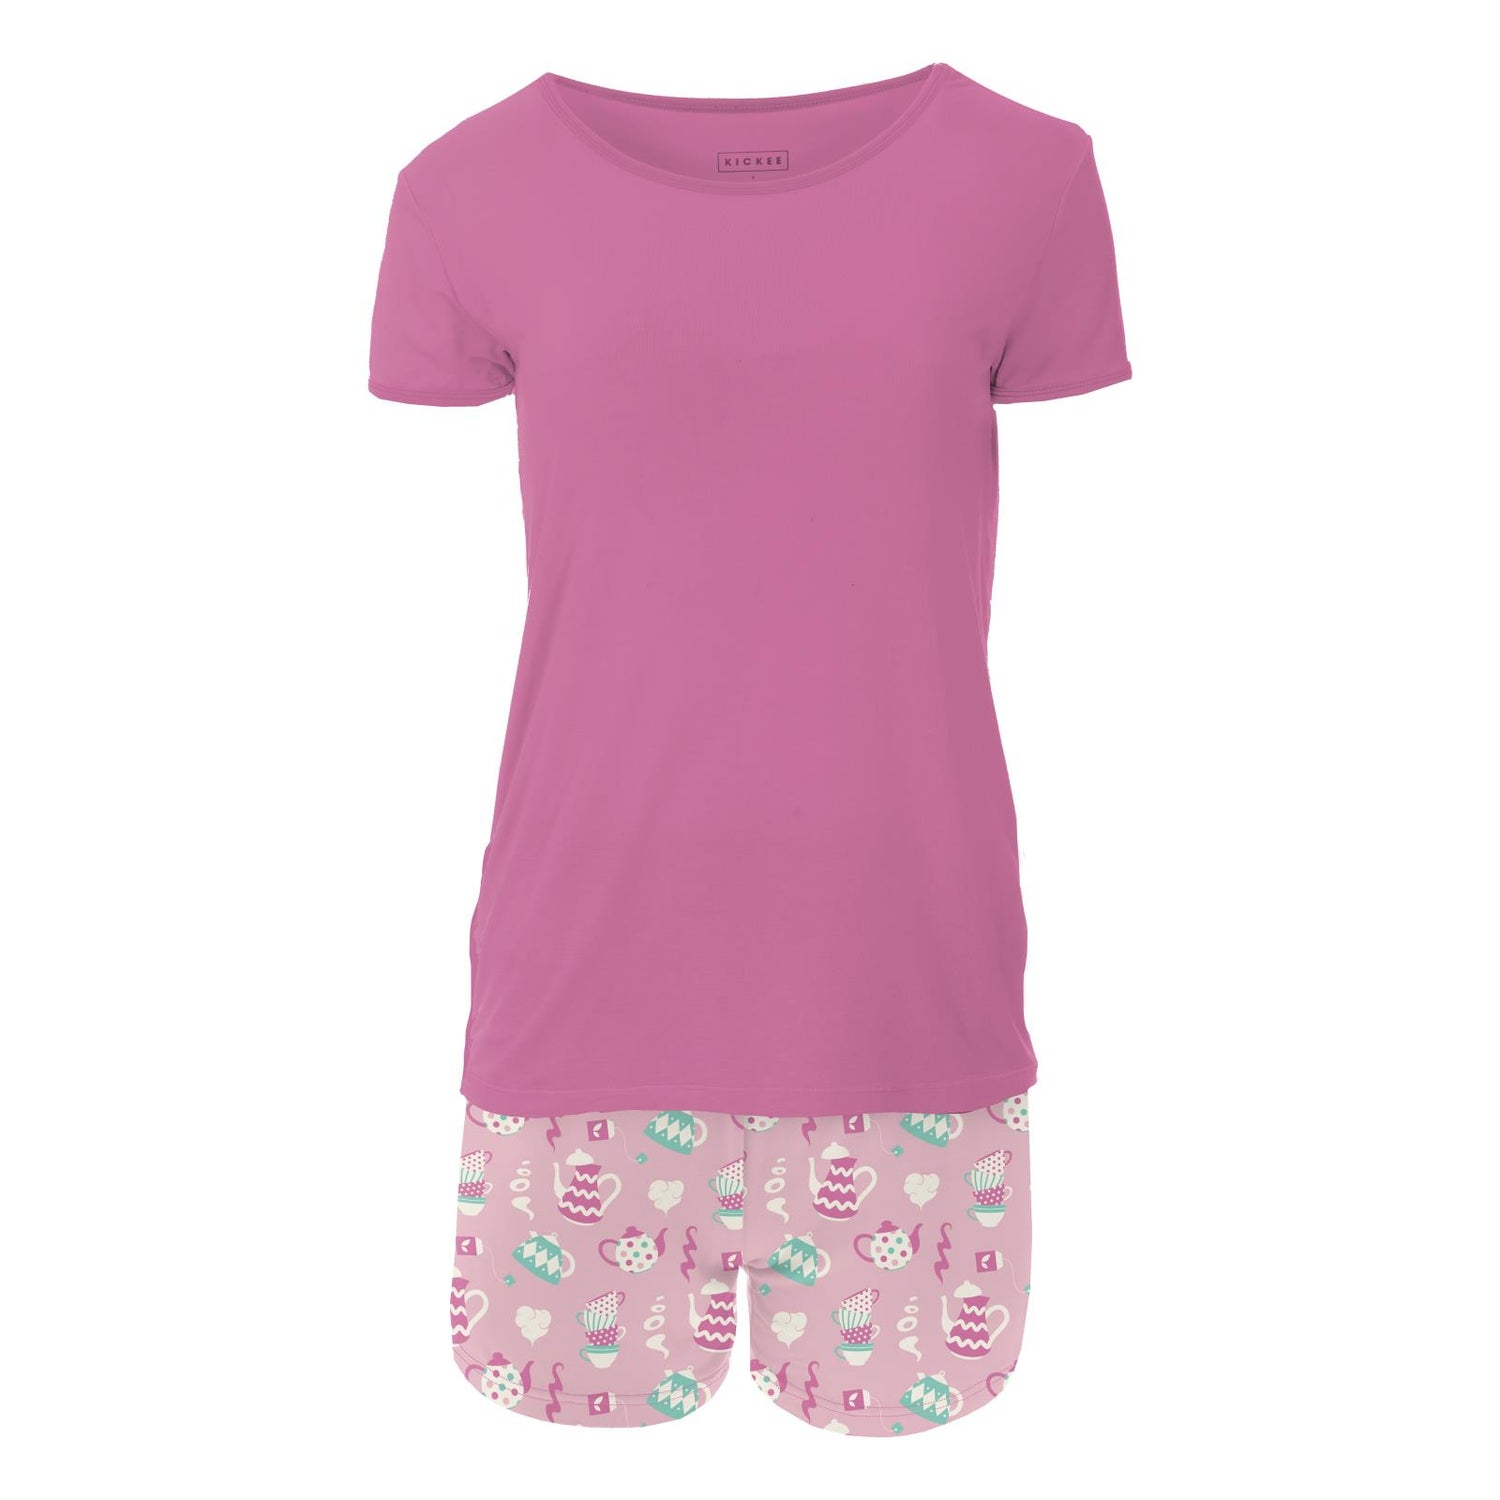 Women's Print Short Sleeve Pajama Set with Shorts in Cake Pop Tea Party